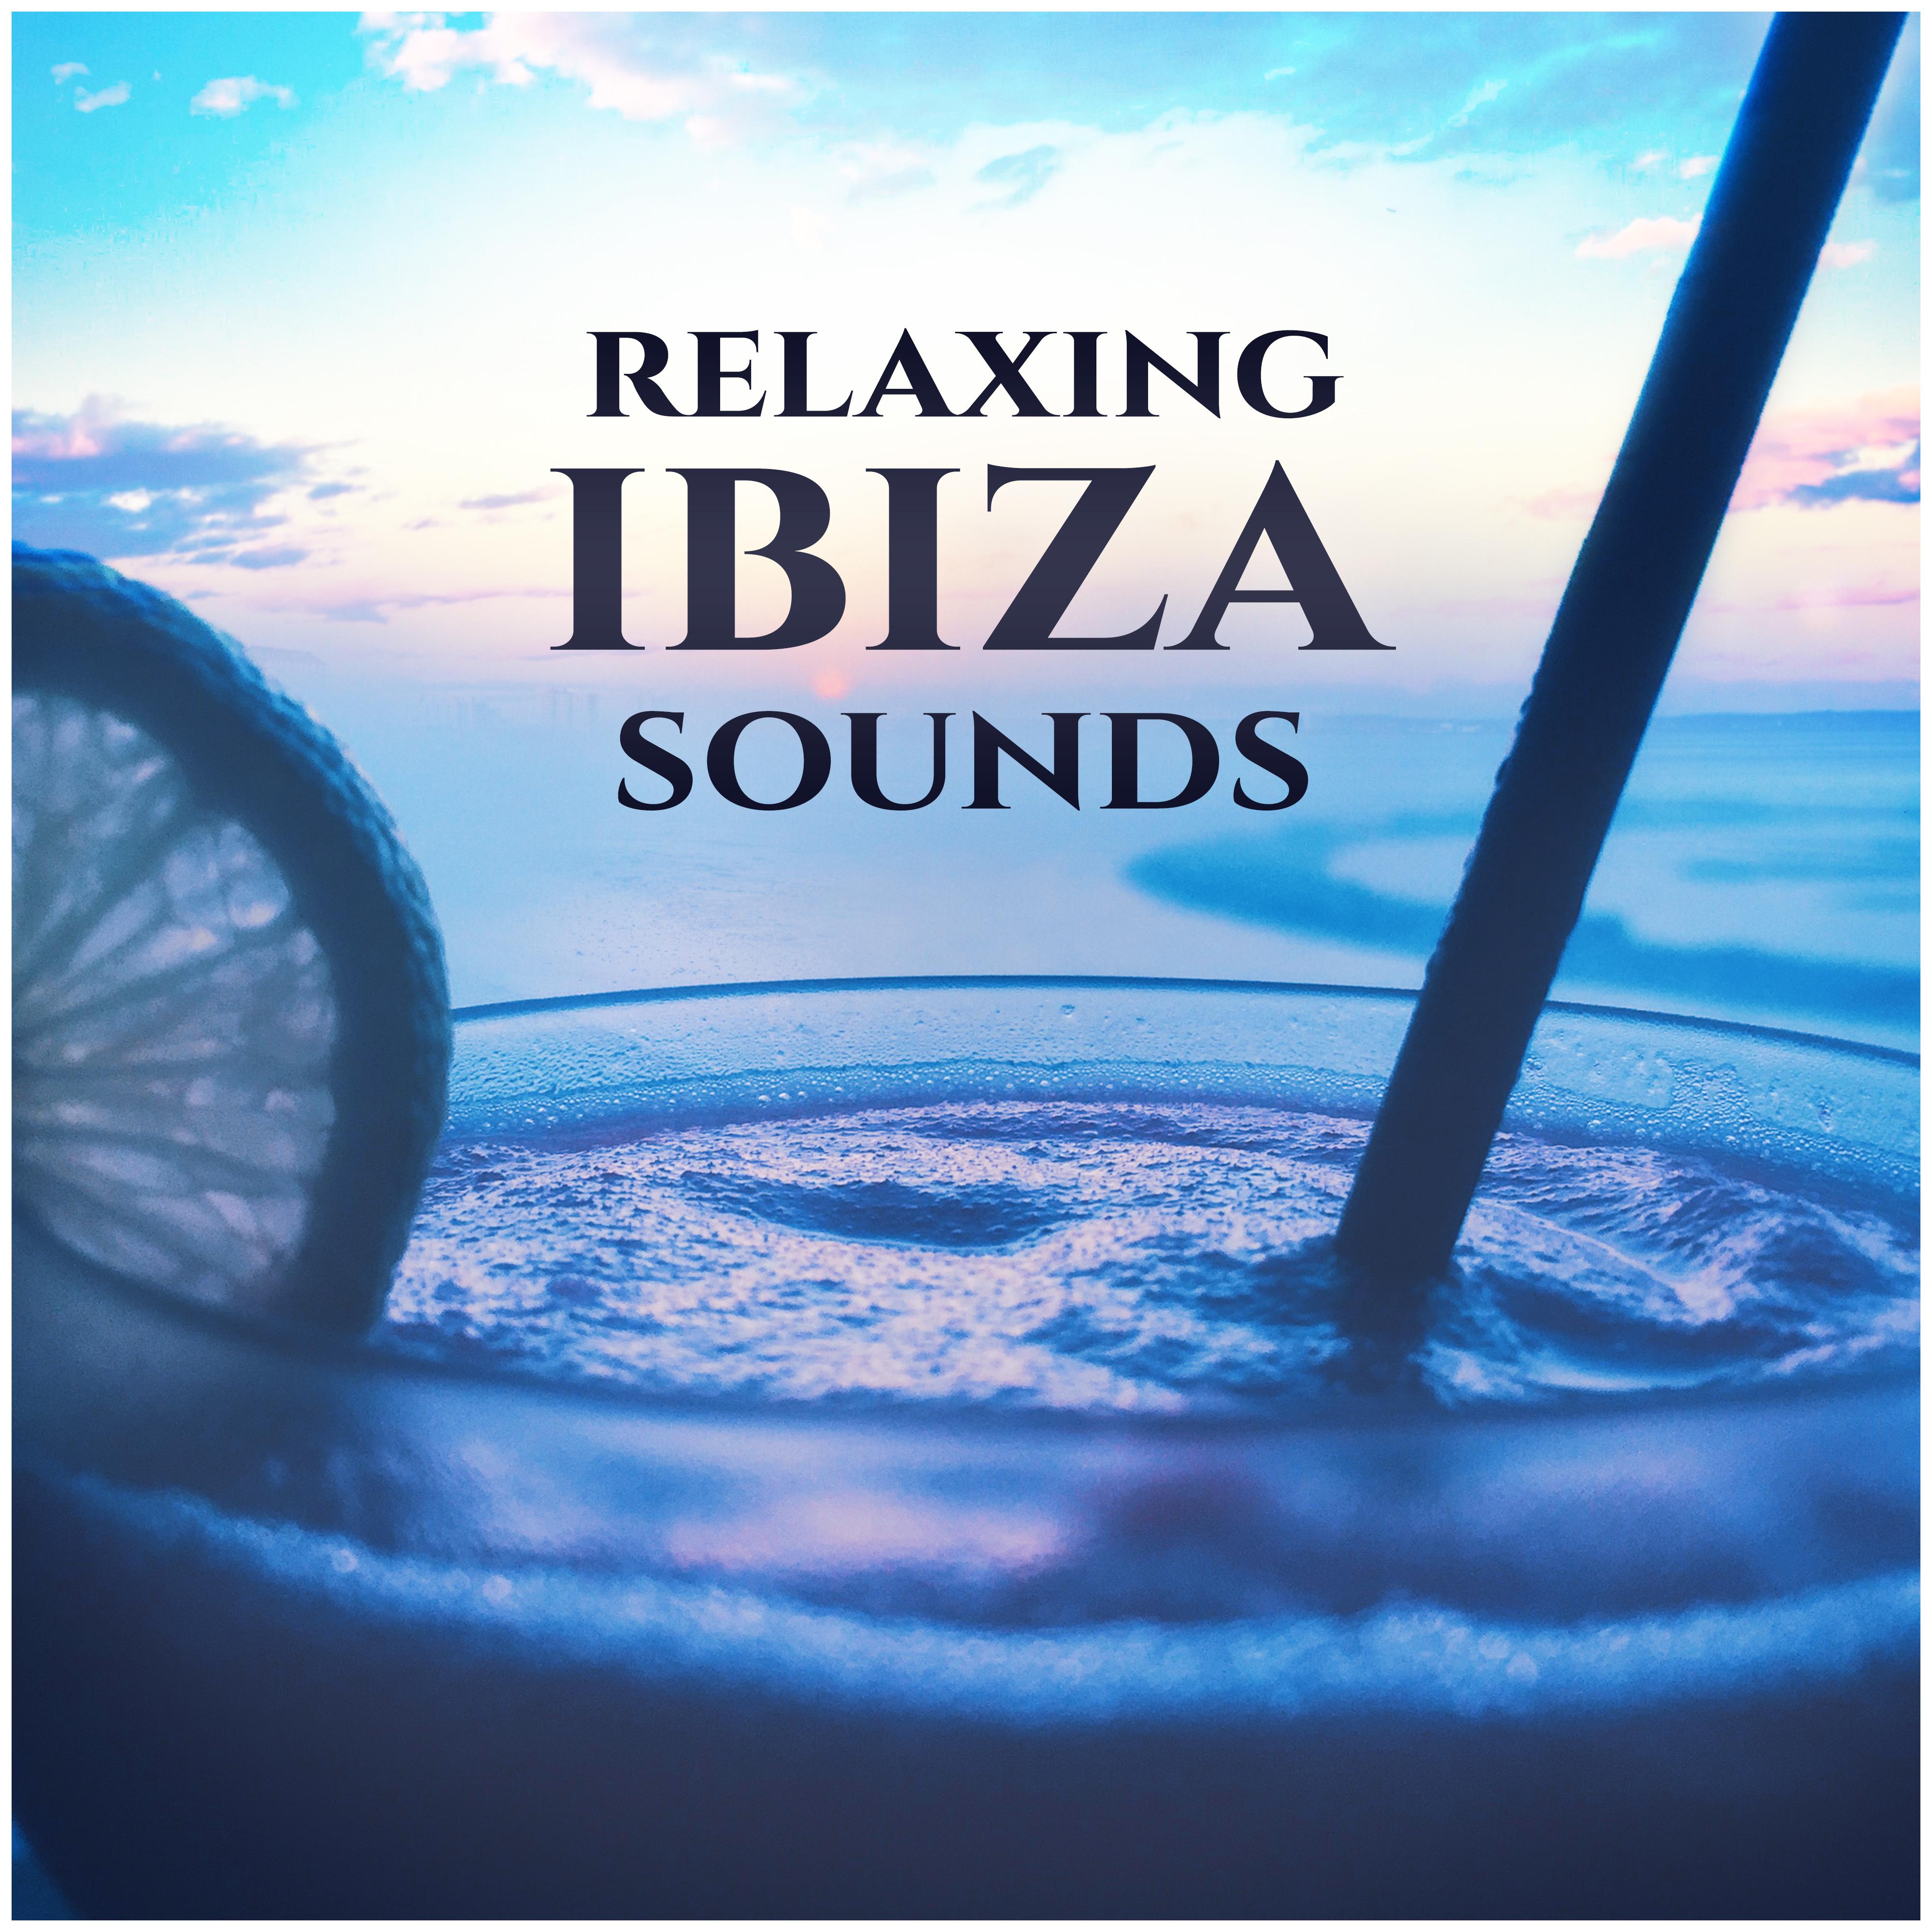 Relaxing Ibiza Sounds – Chilled Melodies, Summer Songs to Relax, Rest a Bit, Soft Chill Out Beats